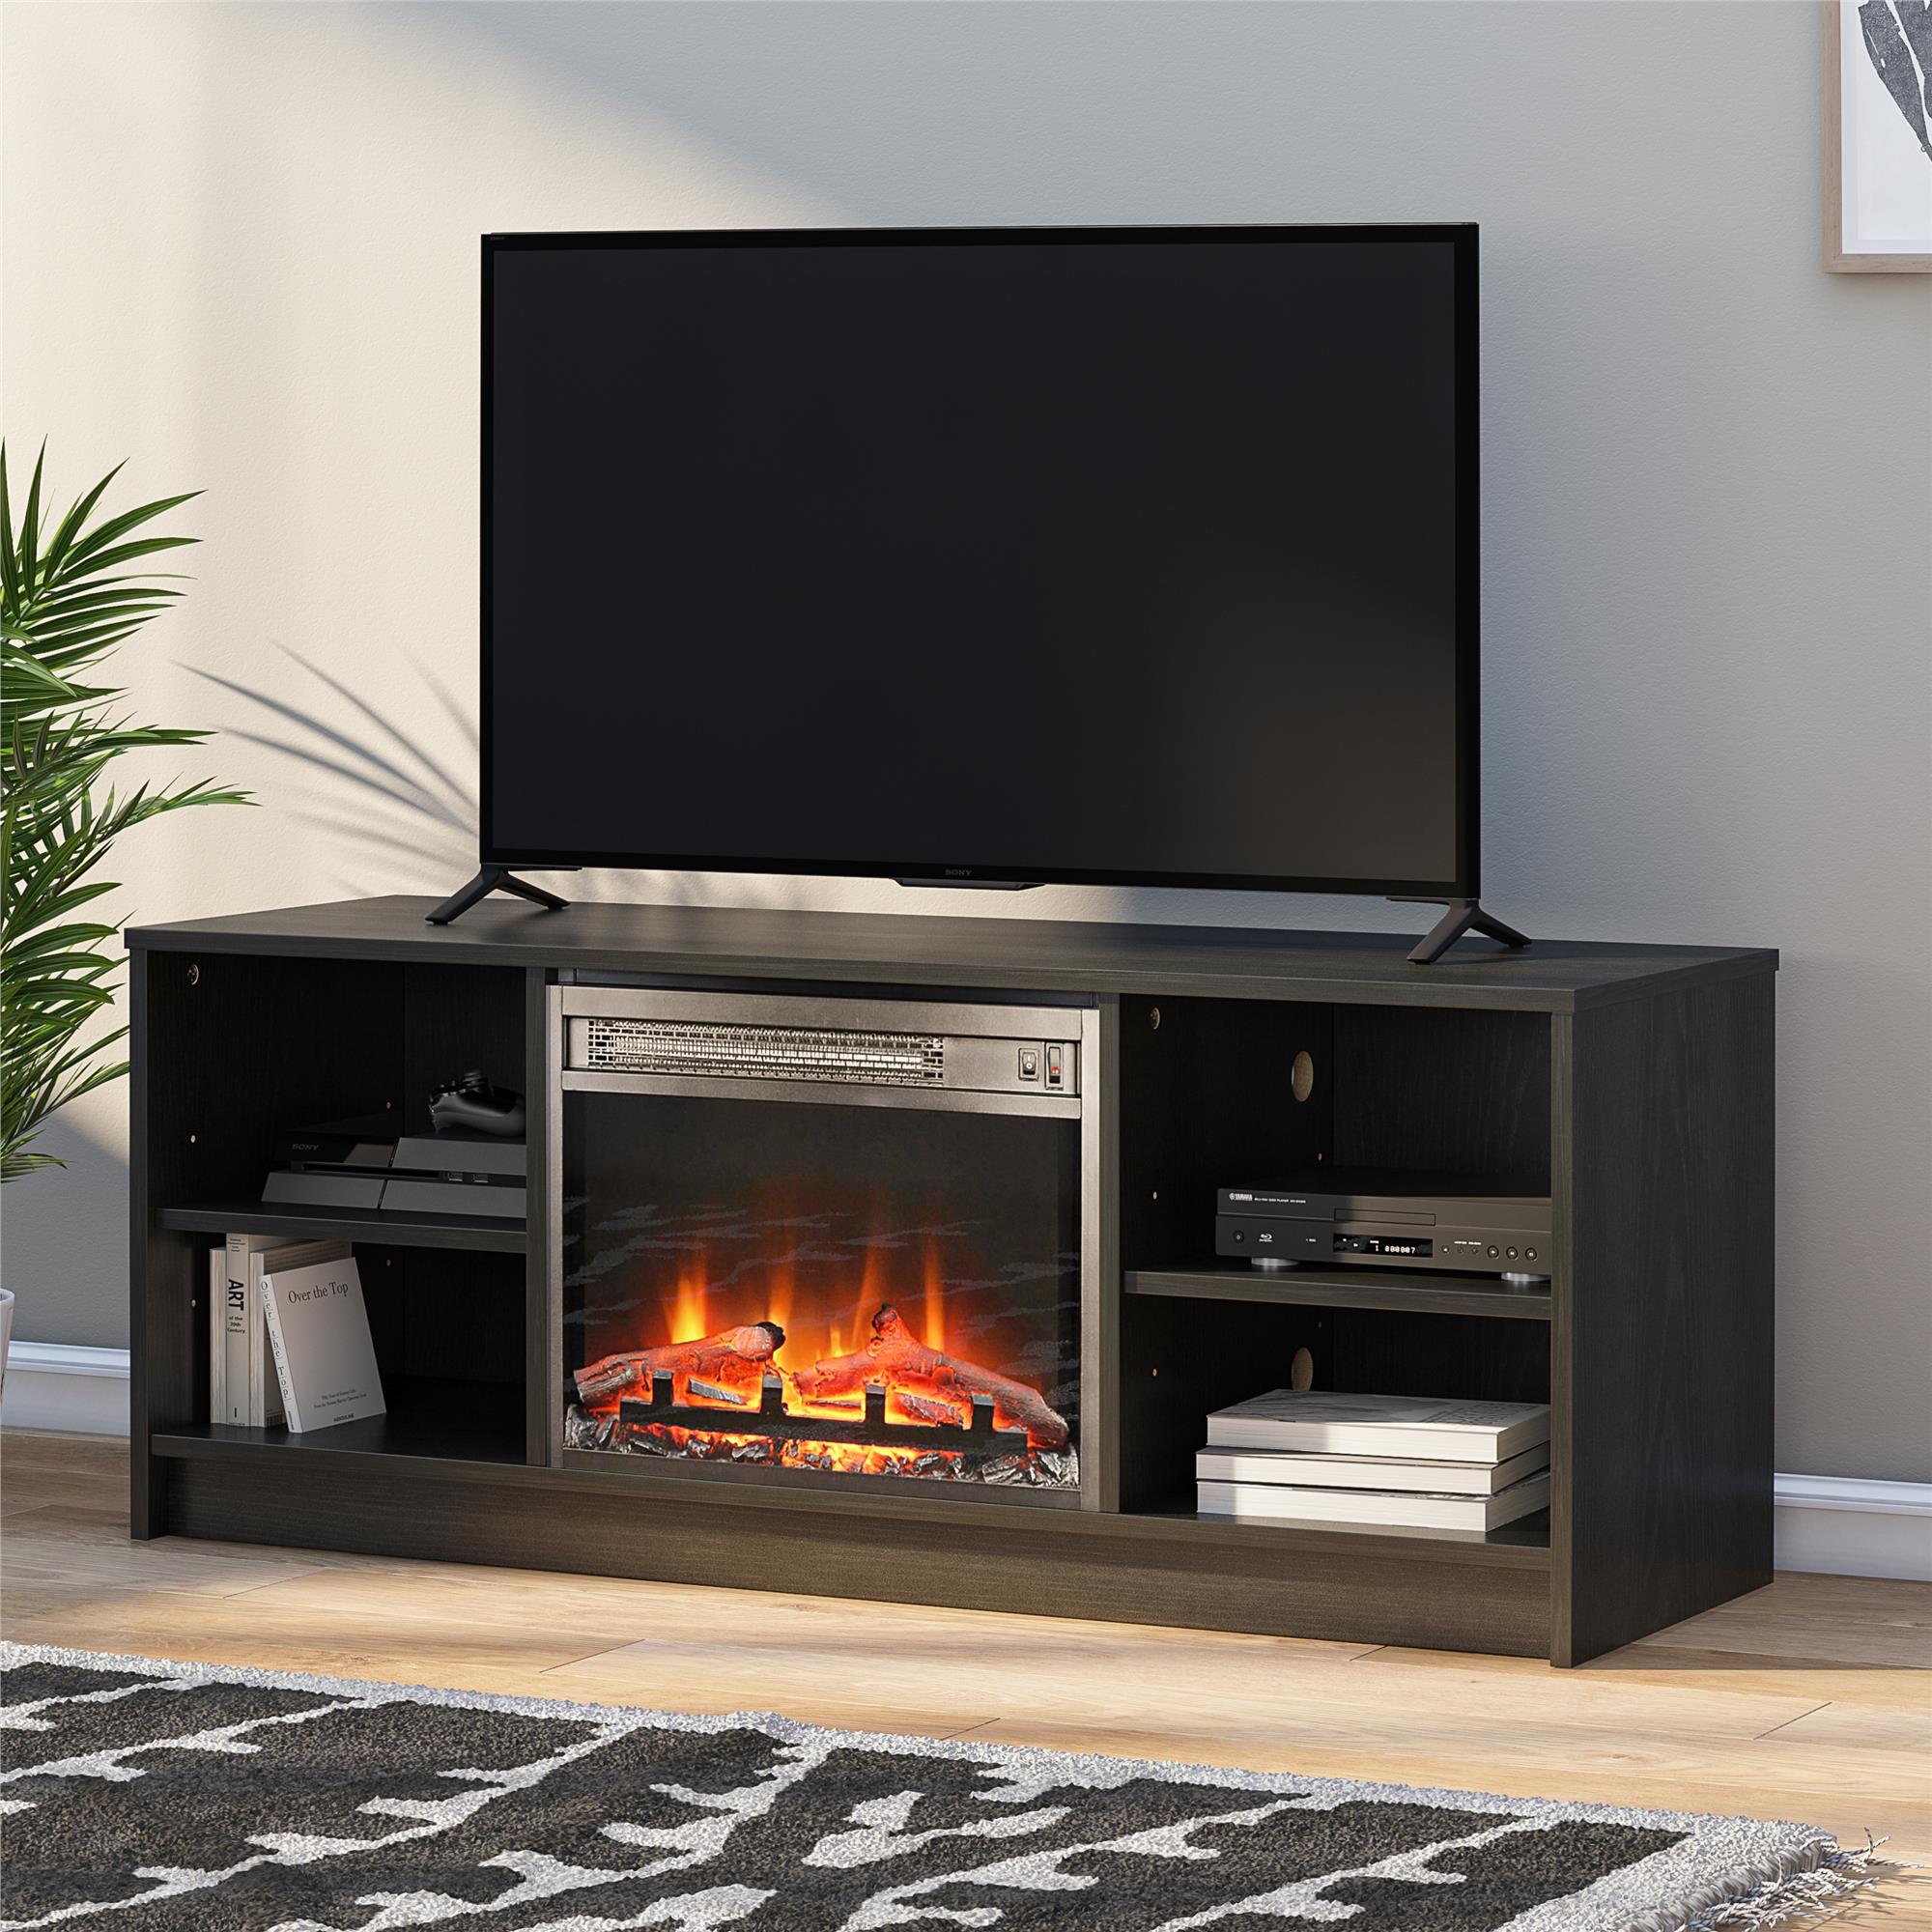 Mainstays Fireplace TV Stand for TVs Up to 55" (Various Colors) $116 + Free Shipping